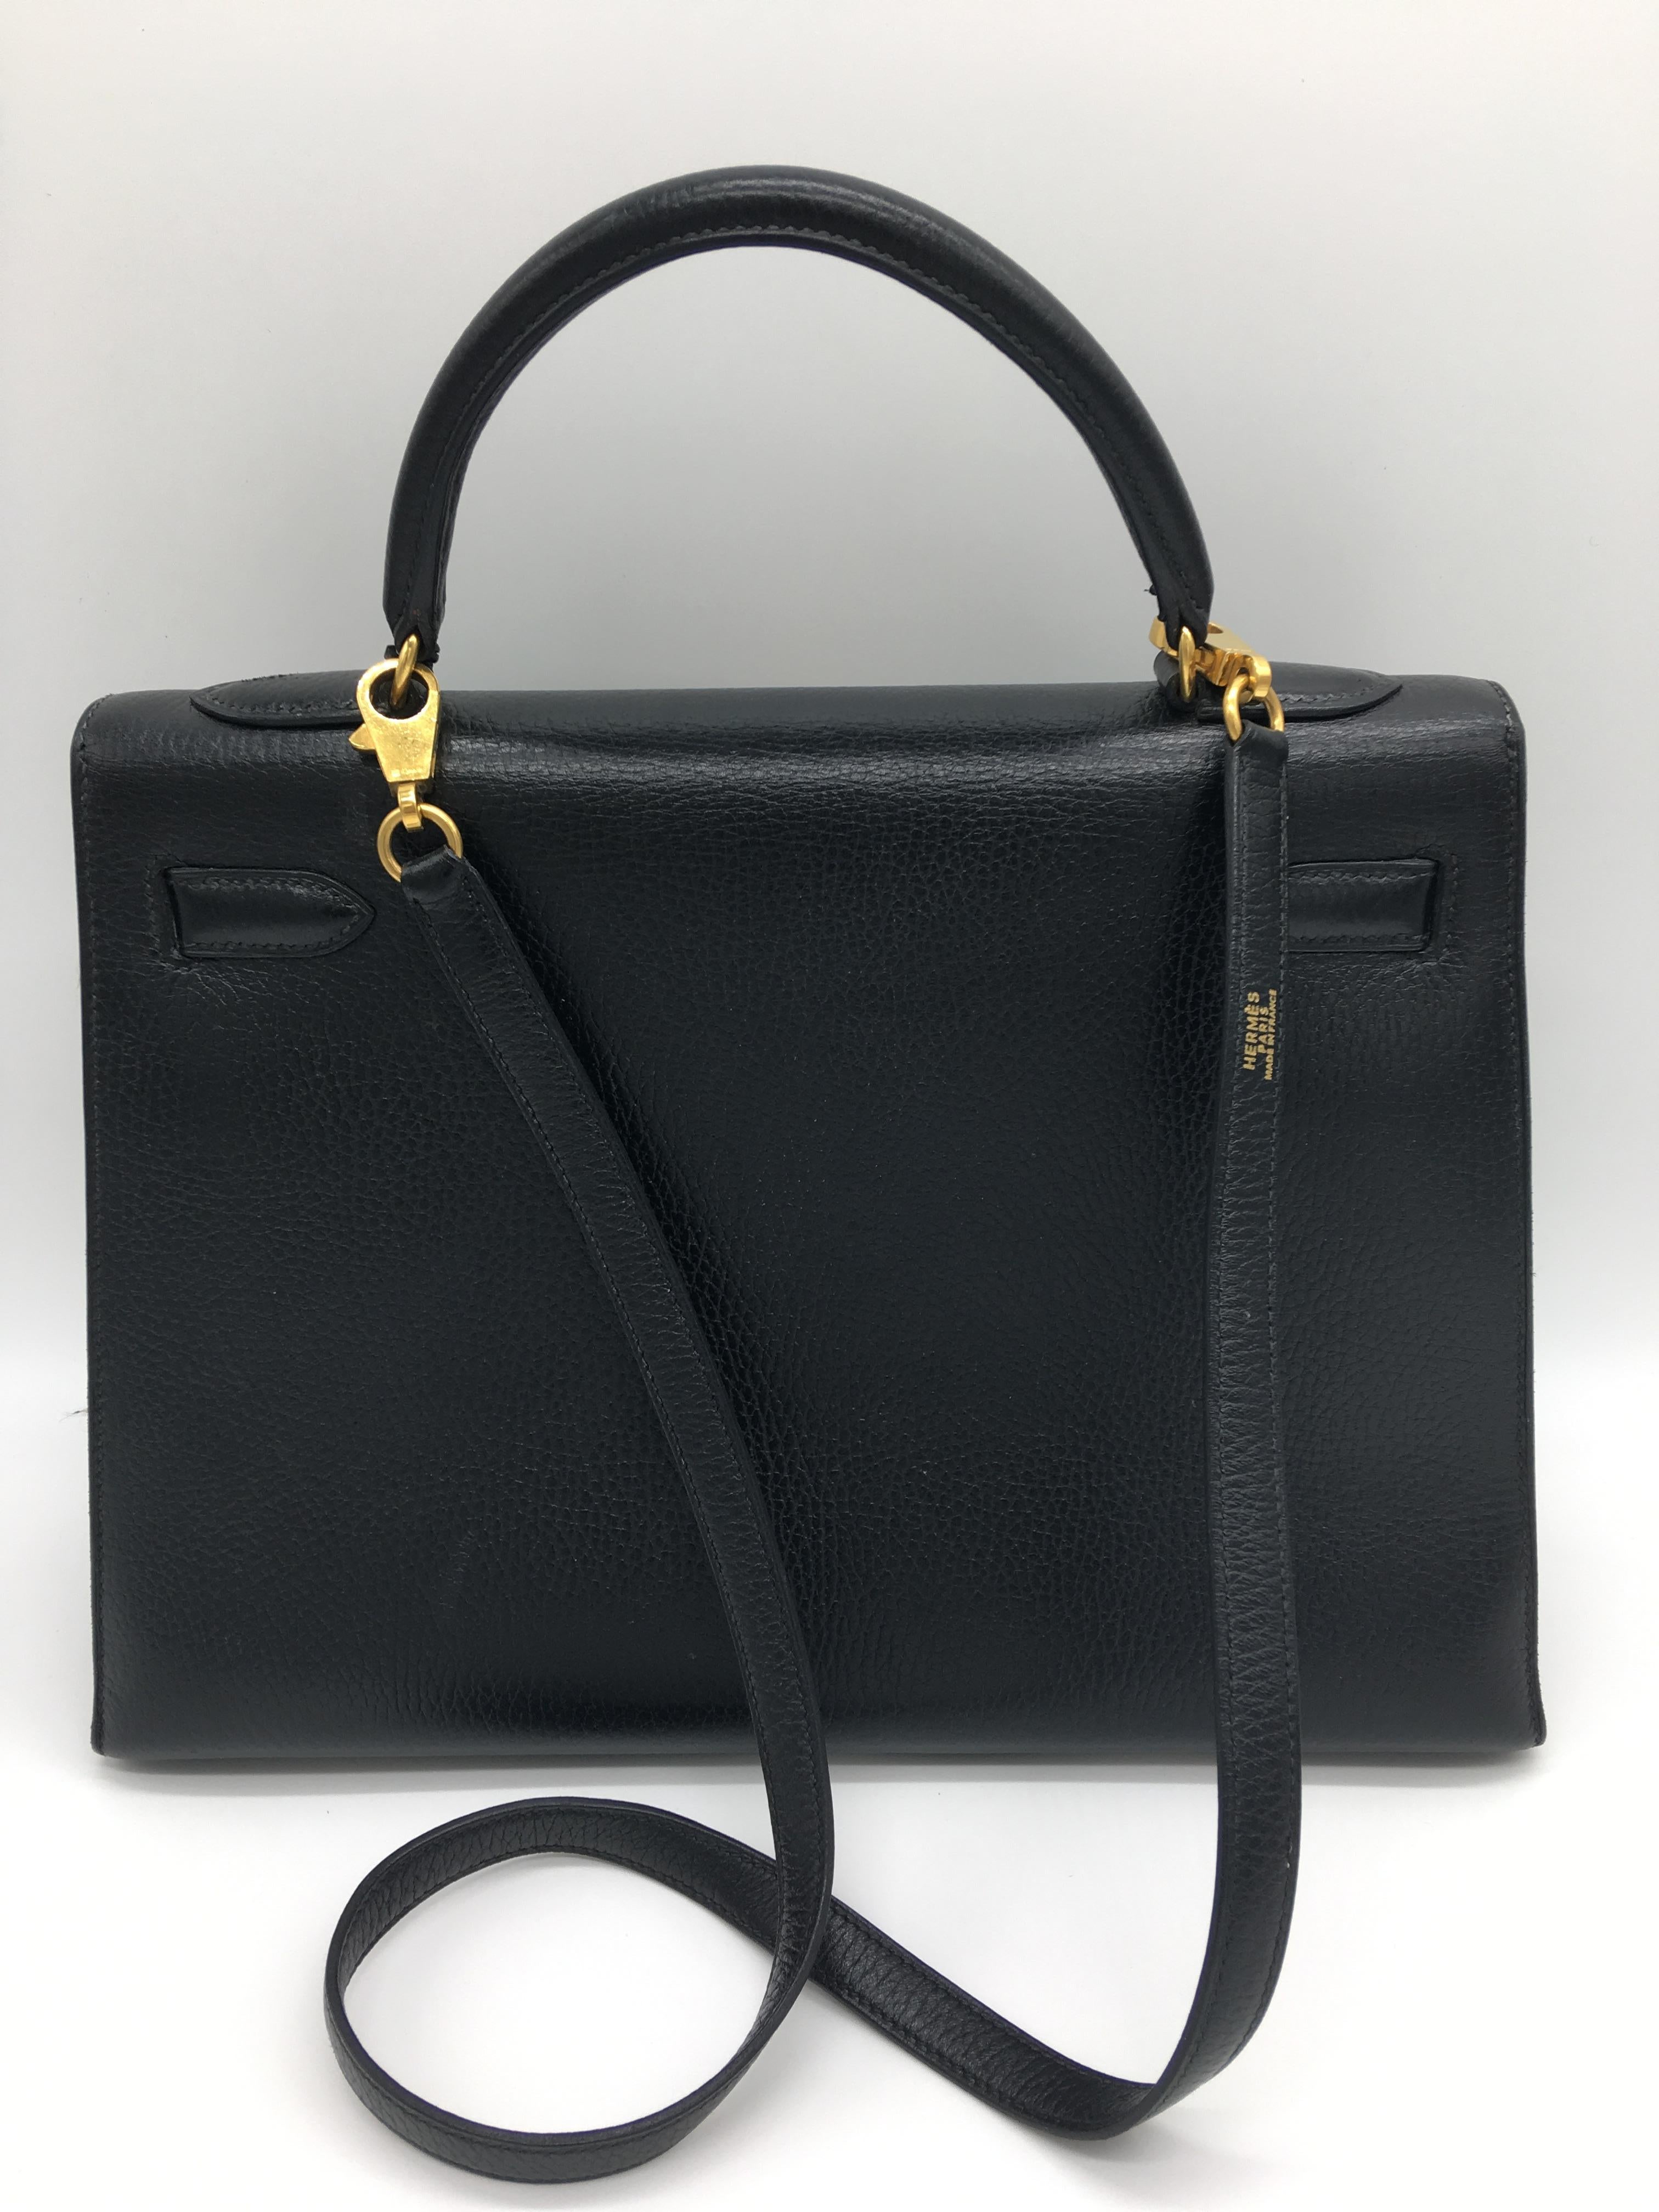 Probably one of the most glamorous and famous Hermes bags – a Black Kelly with Gold Hardware in the structured Sellier design with external stitching which gives it a particularly distinctive look. This is a 32cm Black Kelly Sellier in Evergrain